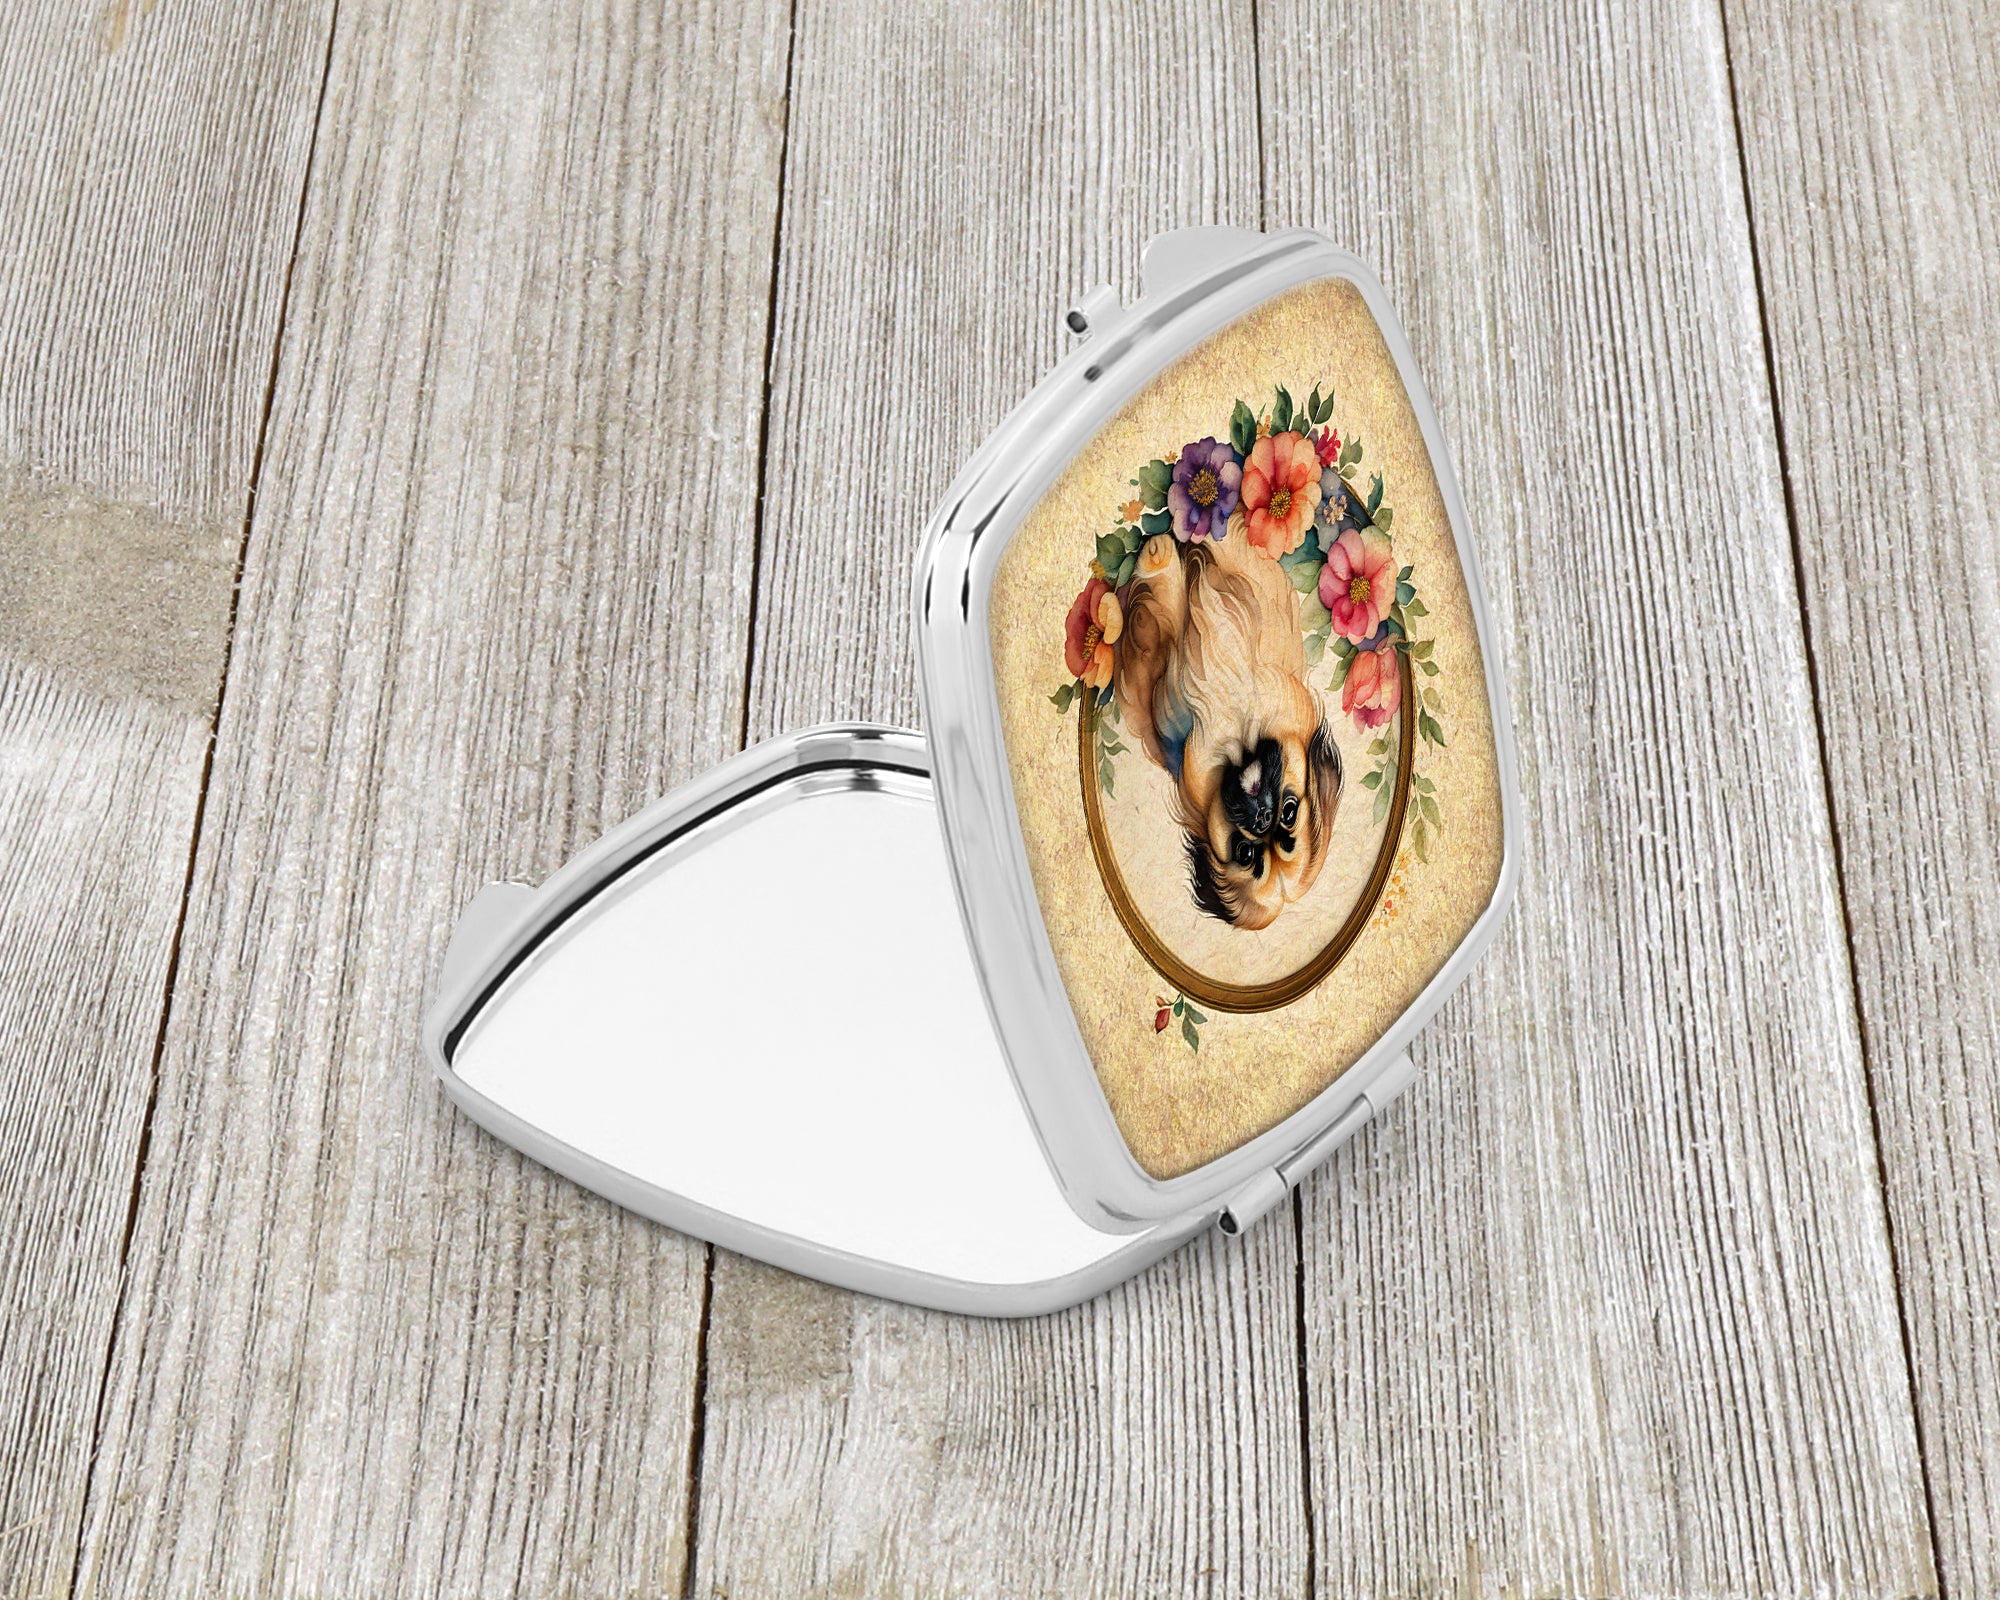 Buy this Pekingese and Flowers Compact Mirror